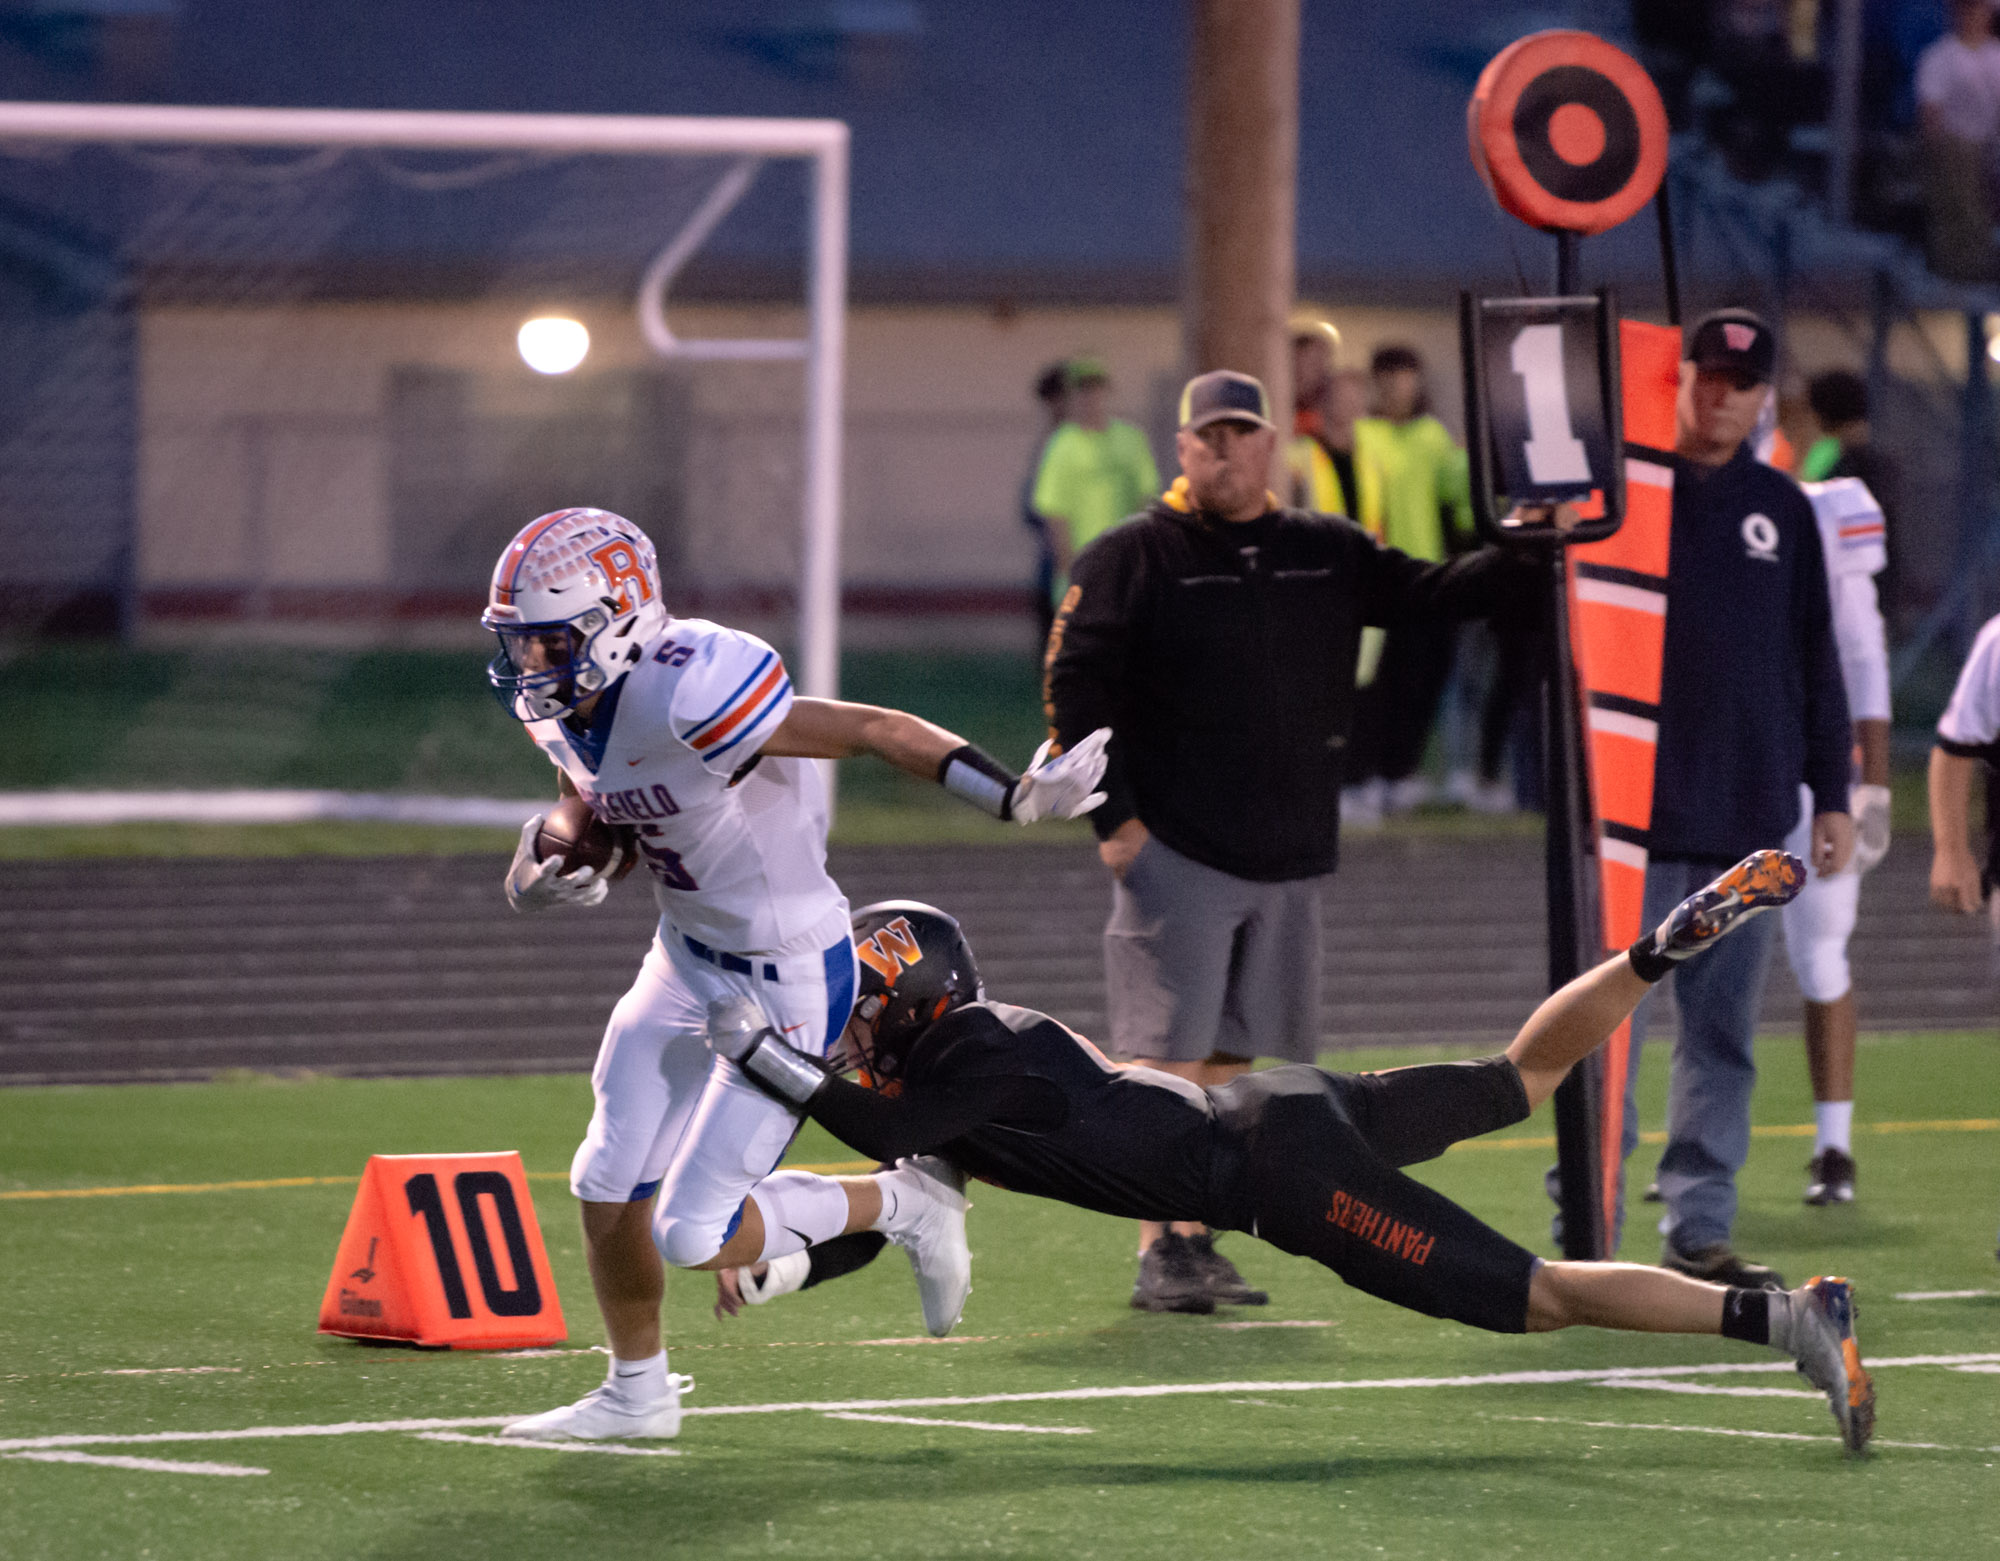 Ridgefield's Ty Snider tries to muscle his way to the end zone but Washougal's Matt Brown drags him down  in a 2A Greater St. Helens League football game on Friday, Oct. 1, 2021, at Fishback Stadium in Washougal. Ridgefield won 39-13.